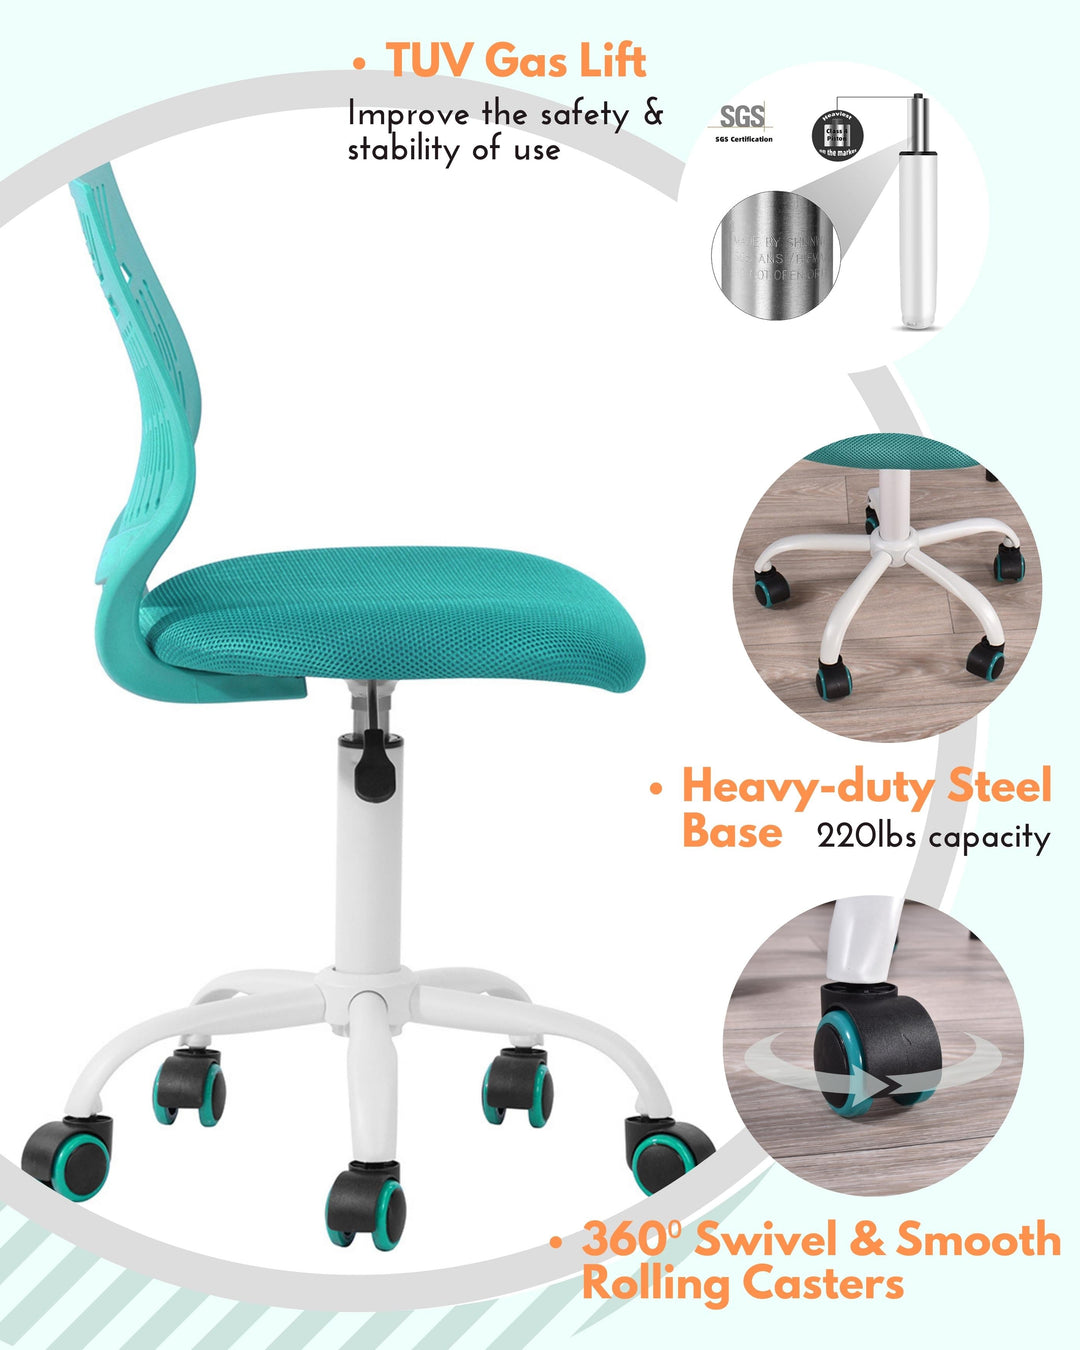 Furniture R Smart Teen Office Chair For Studying With Ergonomic Design